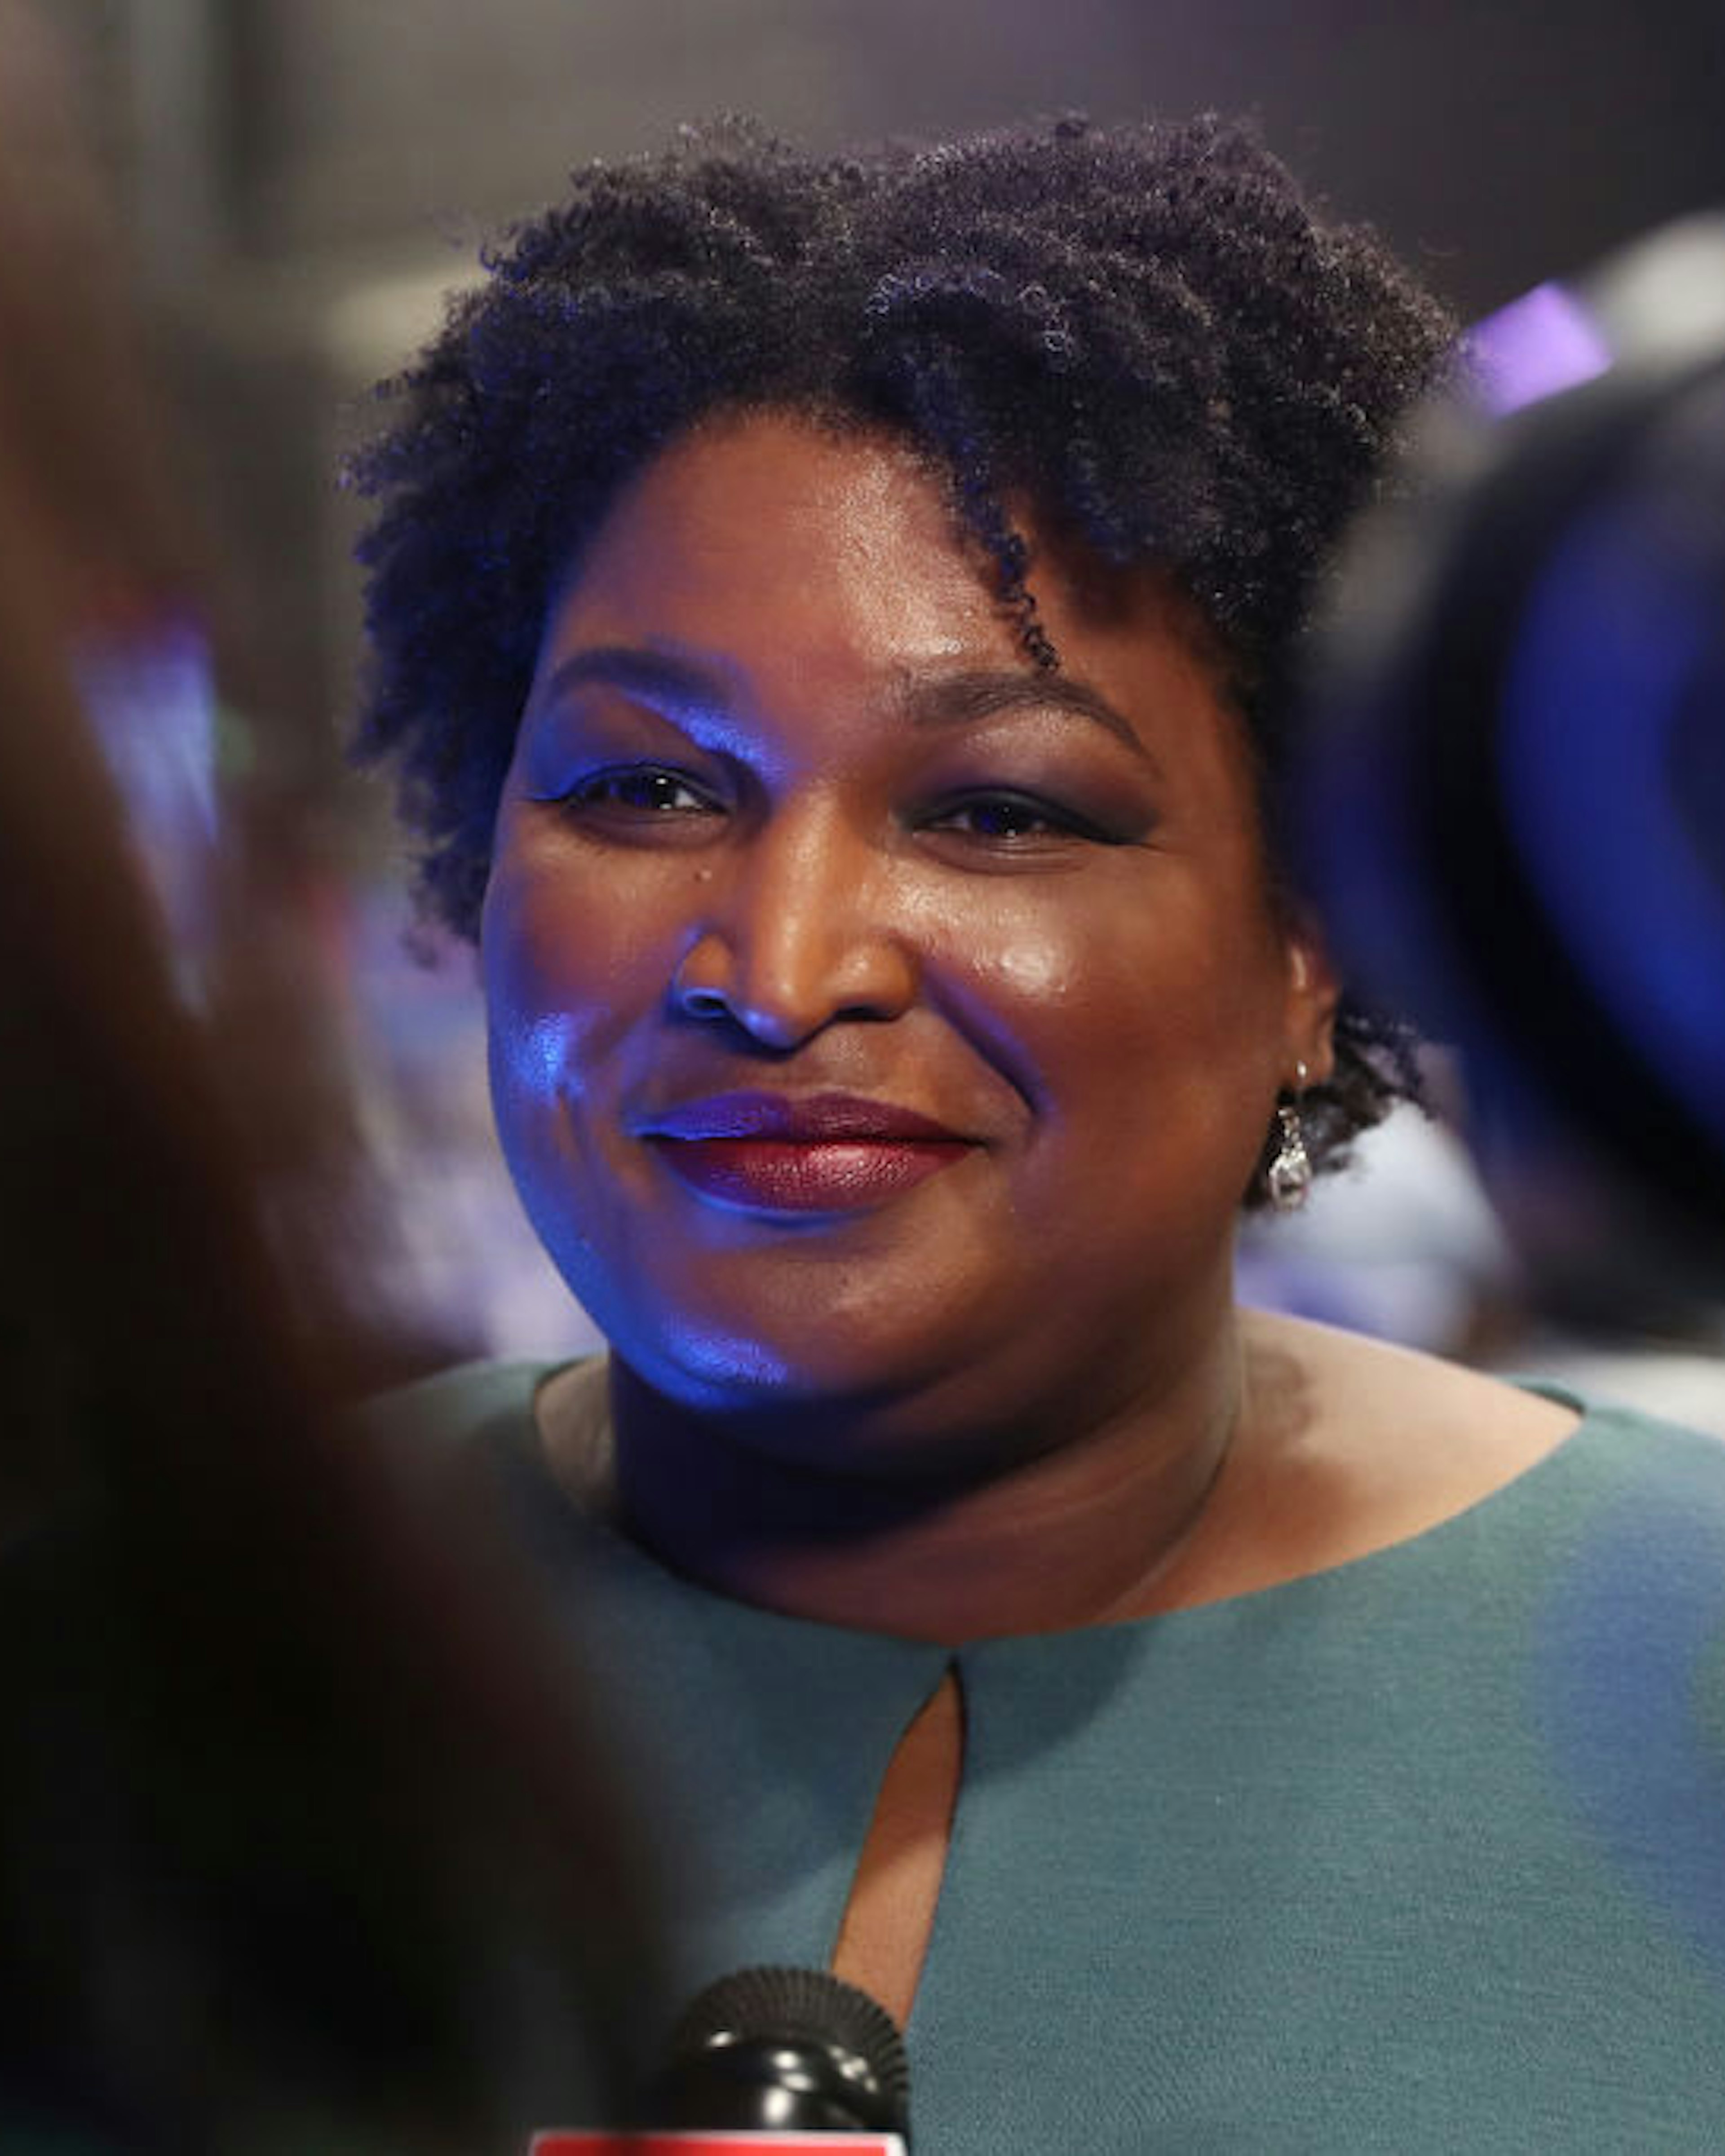 ATLANTA, GEORGIA - NOVEMBER 20: Democratic politician Stacey Abrams speaks to the media before the Democratic Presidential Debate at Tyler Perry Studios November 20, 2019 in Atlanta, Georgia. Ten Democratic presidential hopefuls were chosen from the larger field of candidates to participate in the debate hosted by MSNBC and The Washington Post. (Photo by Joe Raedle/Getty Images)